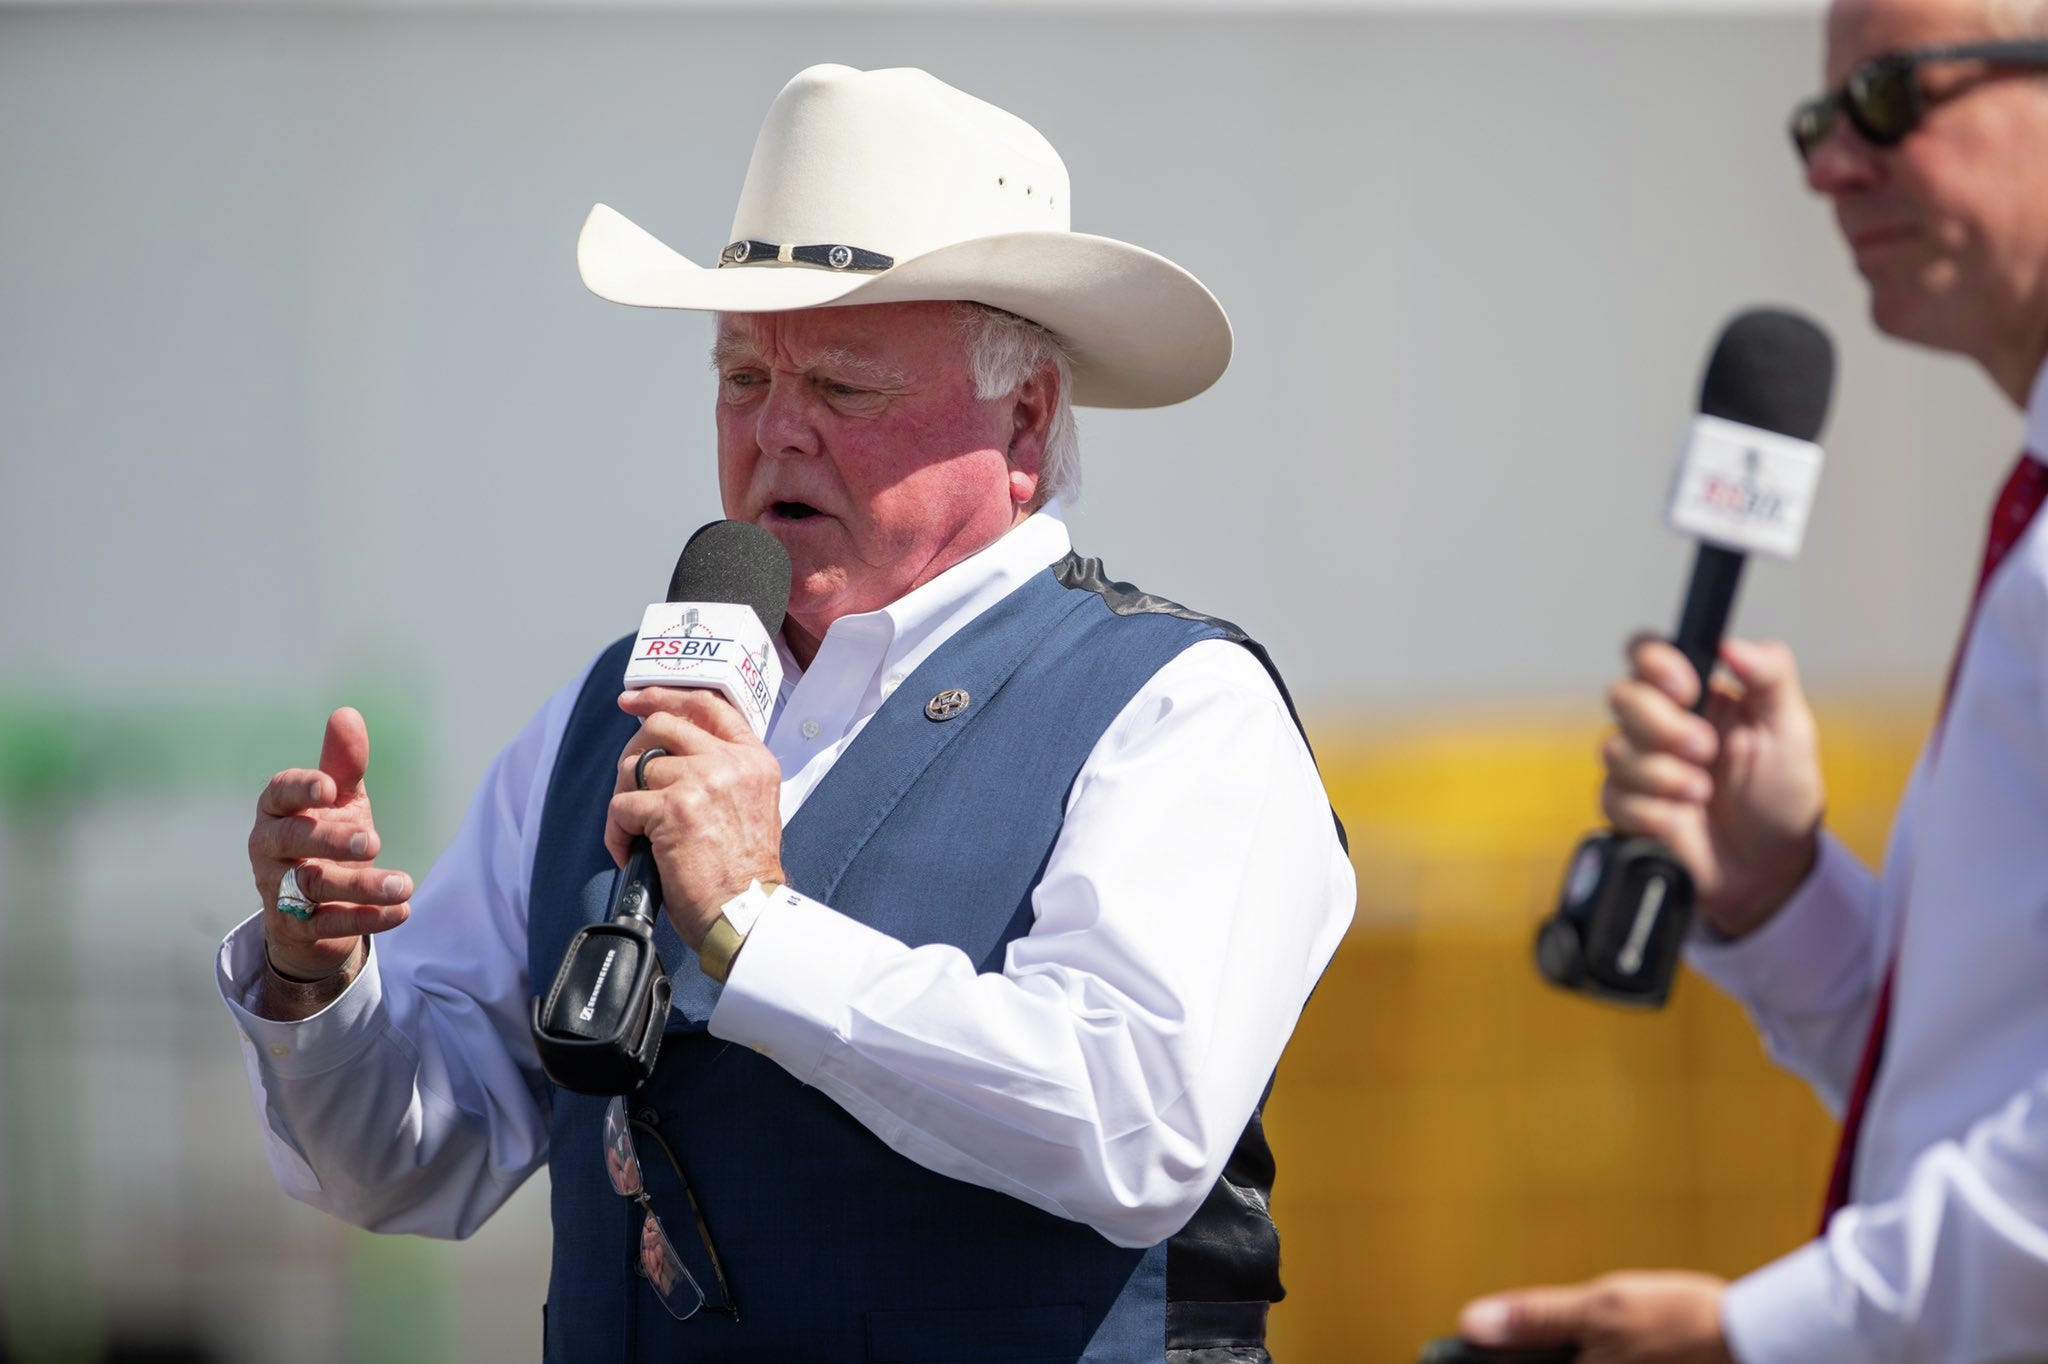 After Trump rally shooting, there will be 'more enthusiasm at this convention than ever,' Texas Agriculture Commissioner says